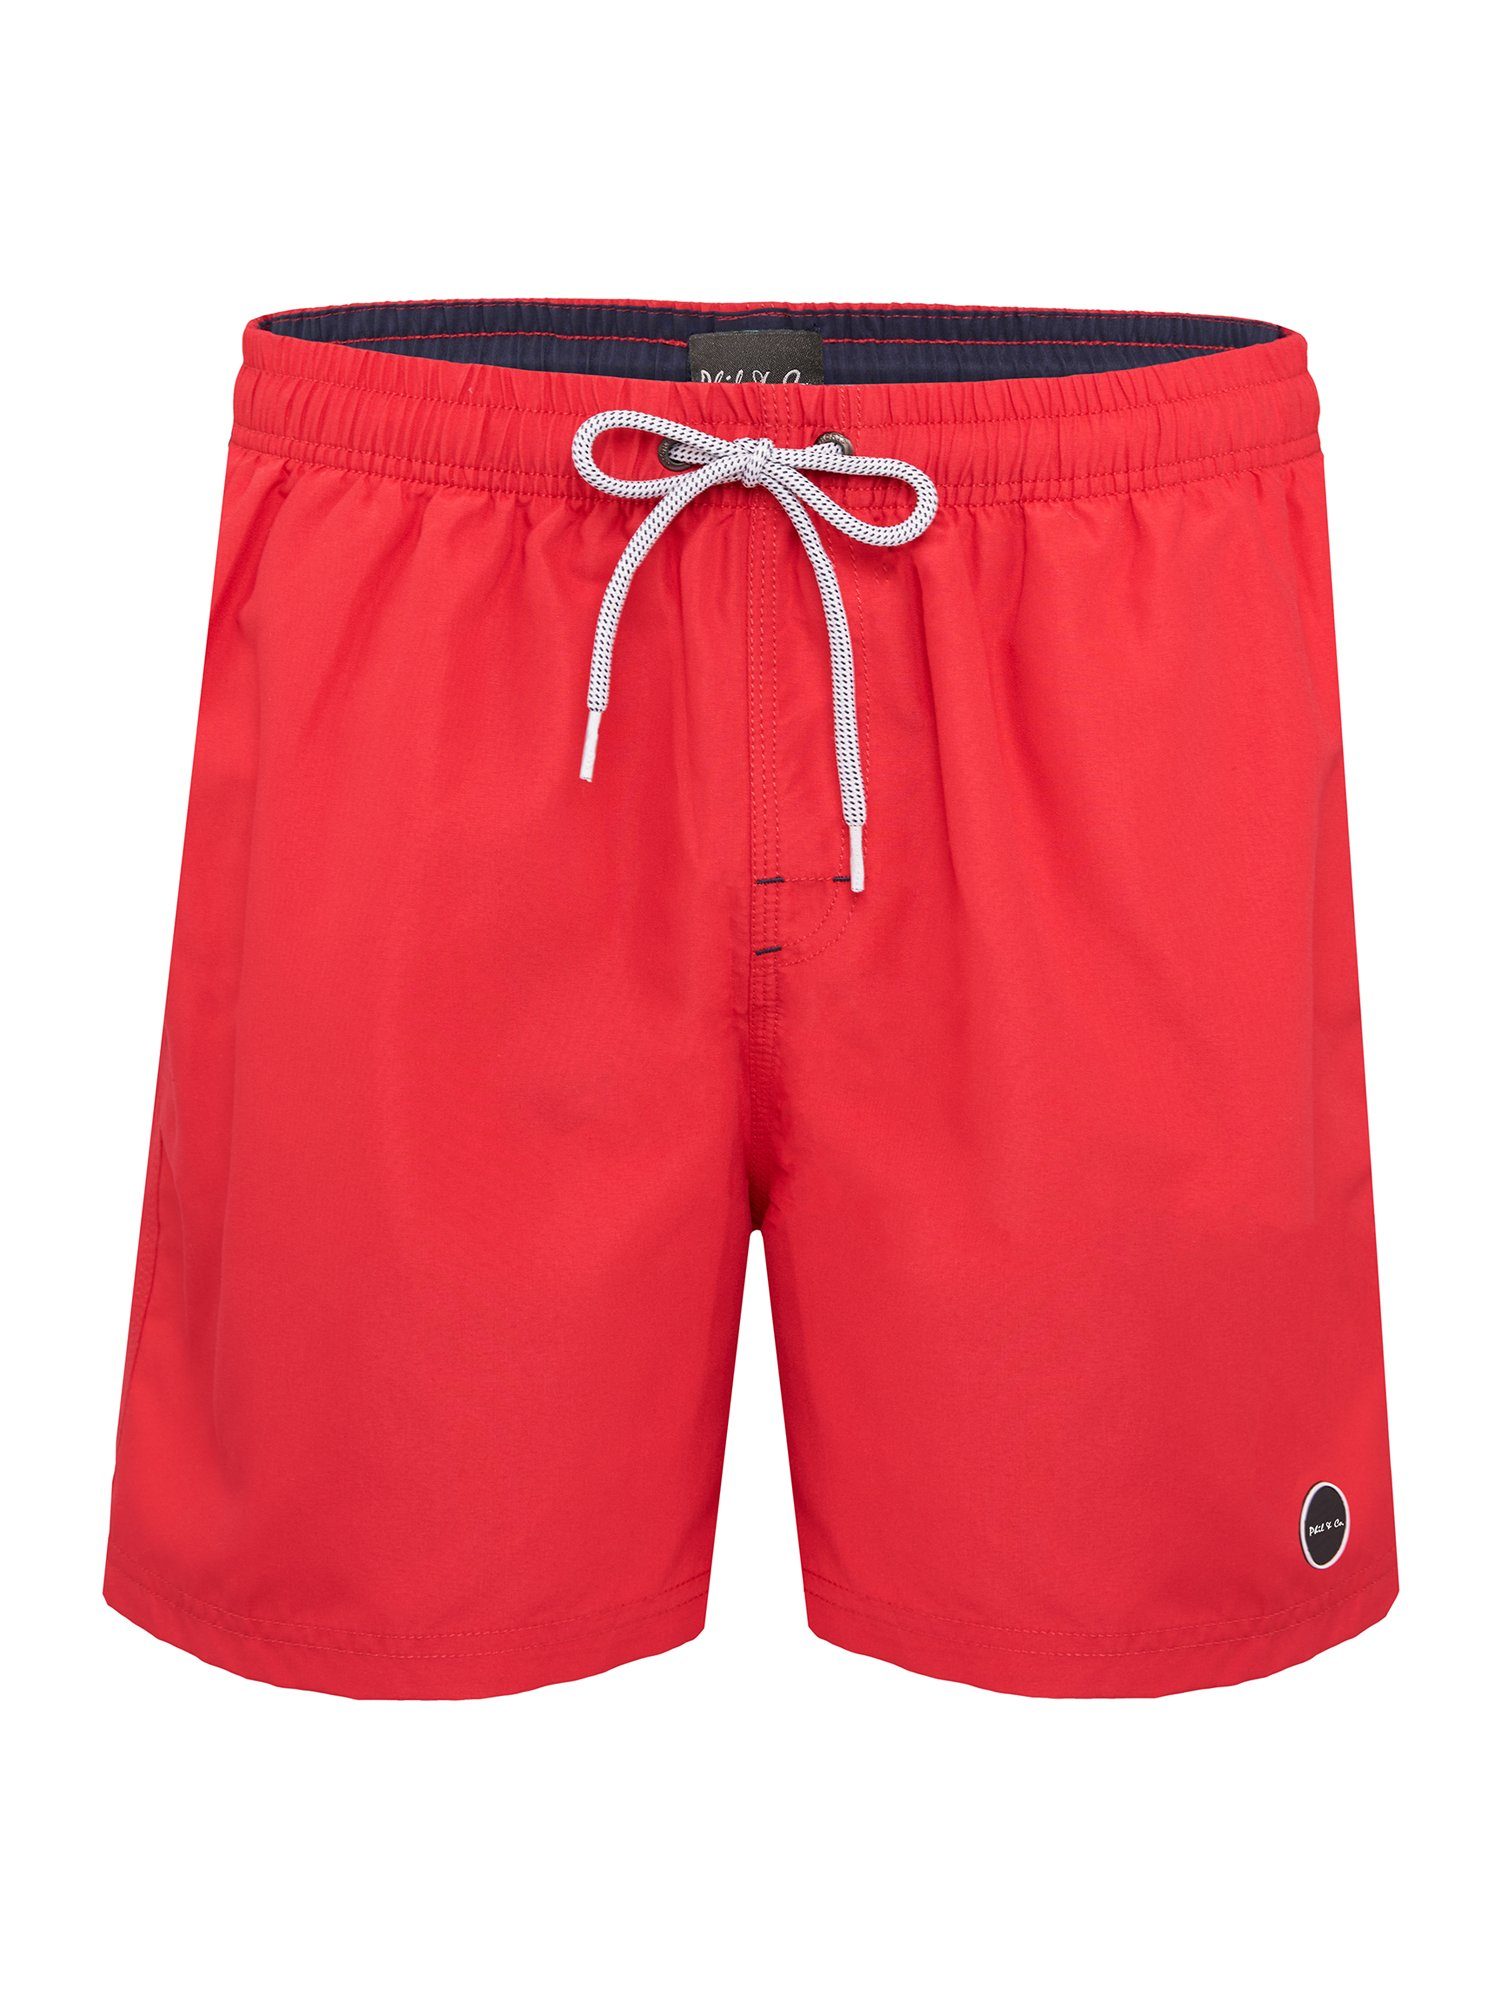 Classic solid Phil & red (1-St) Badeshorts Co.